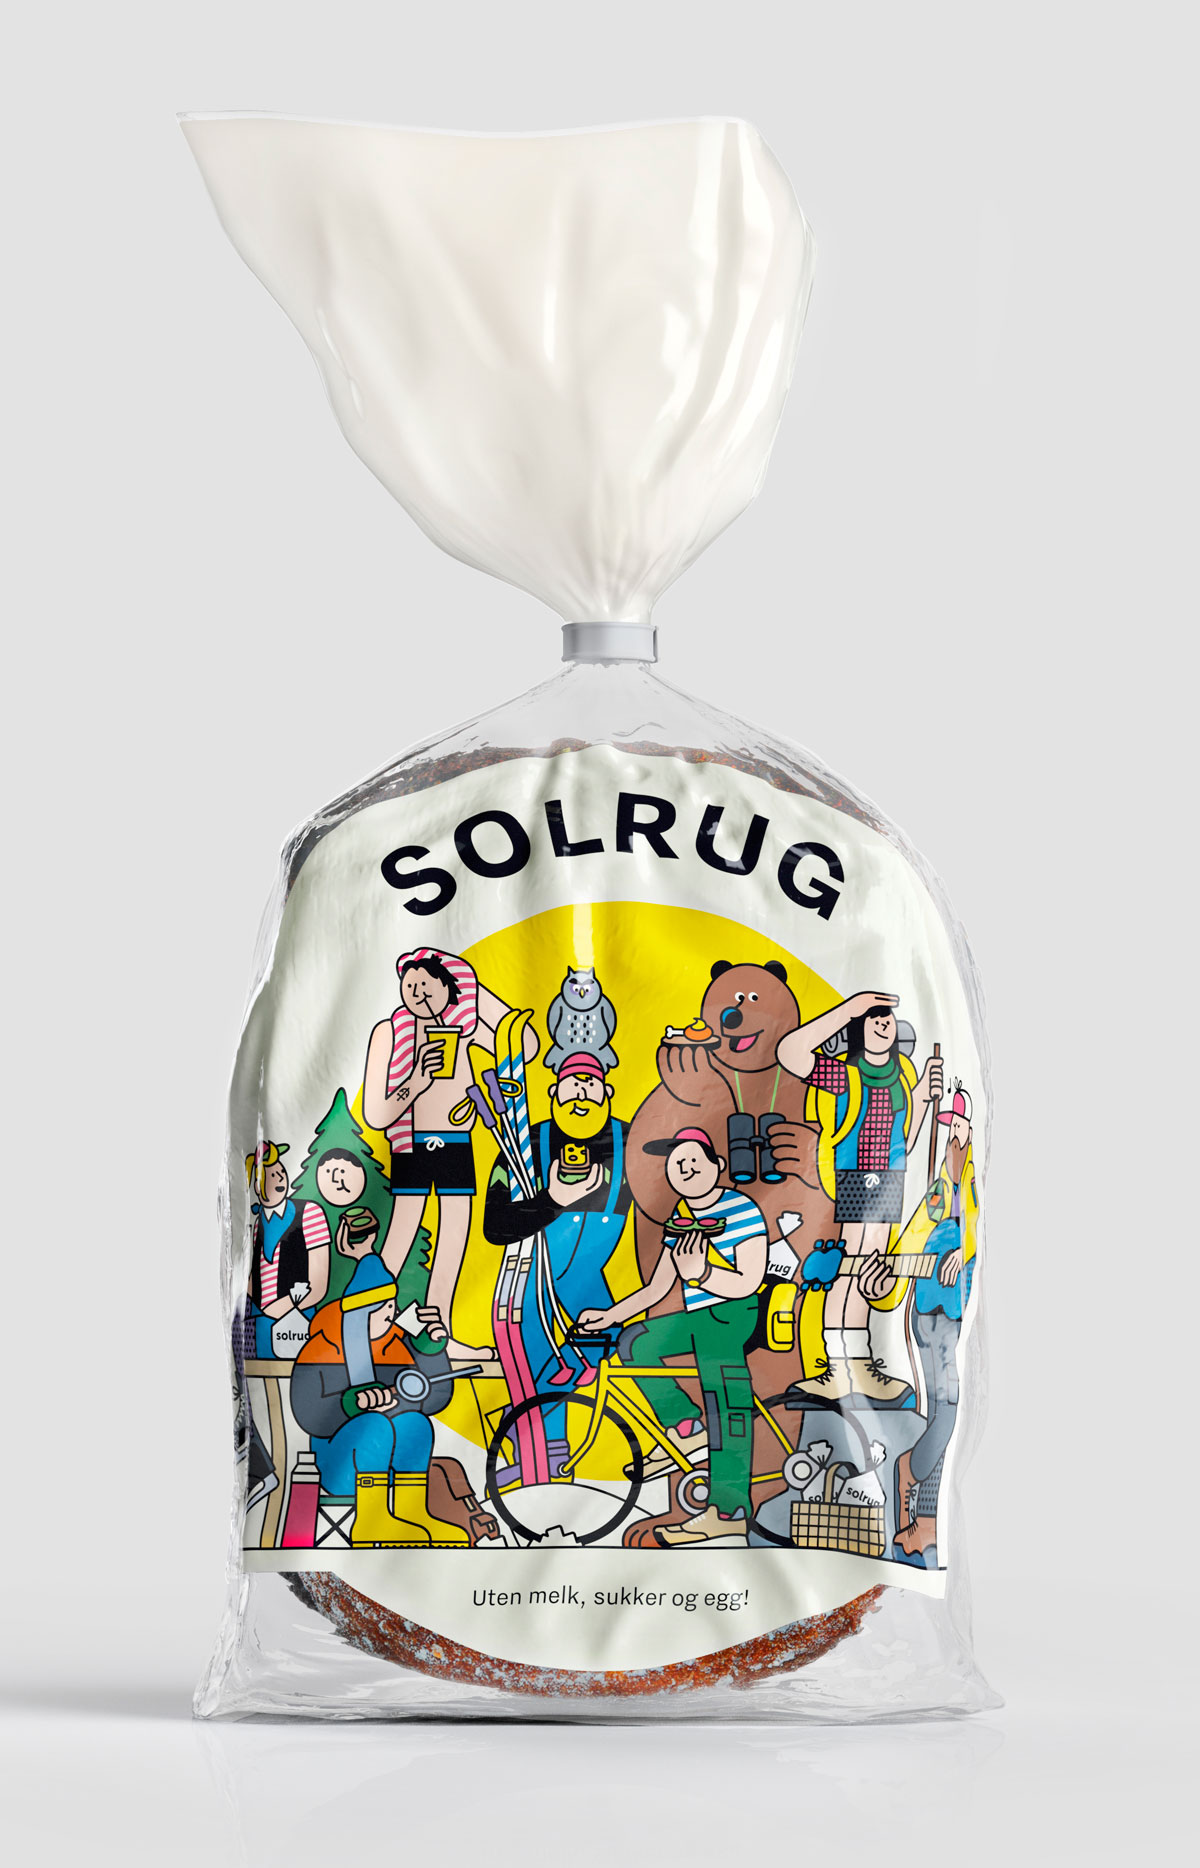 Package design for Solrug by Bielke & Yang, Norway, featuring illustration by Rami Niemi, Finland